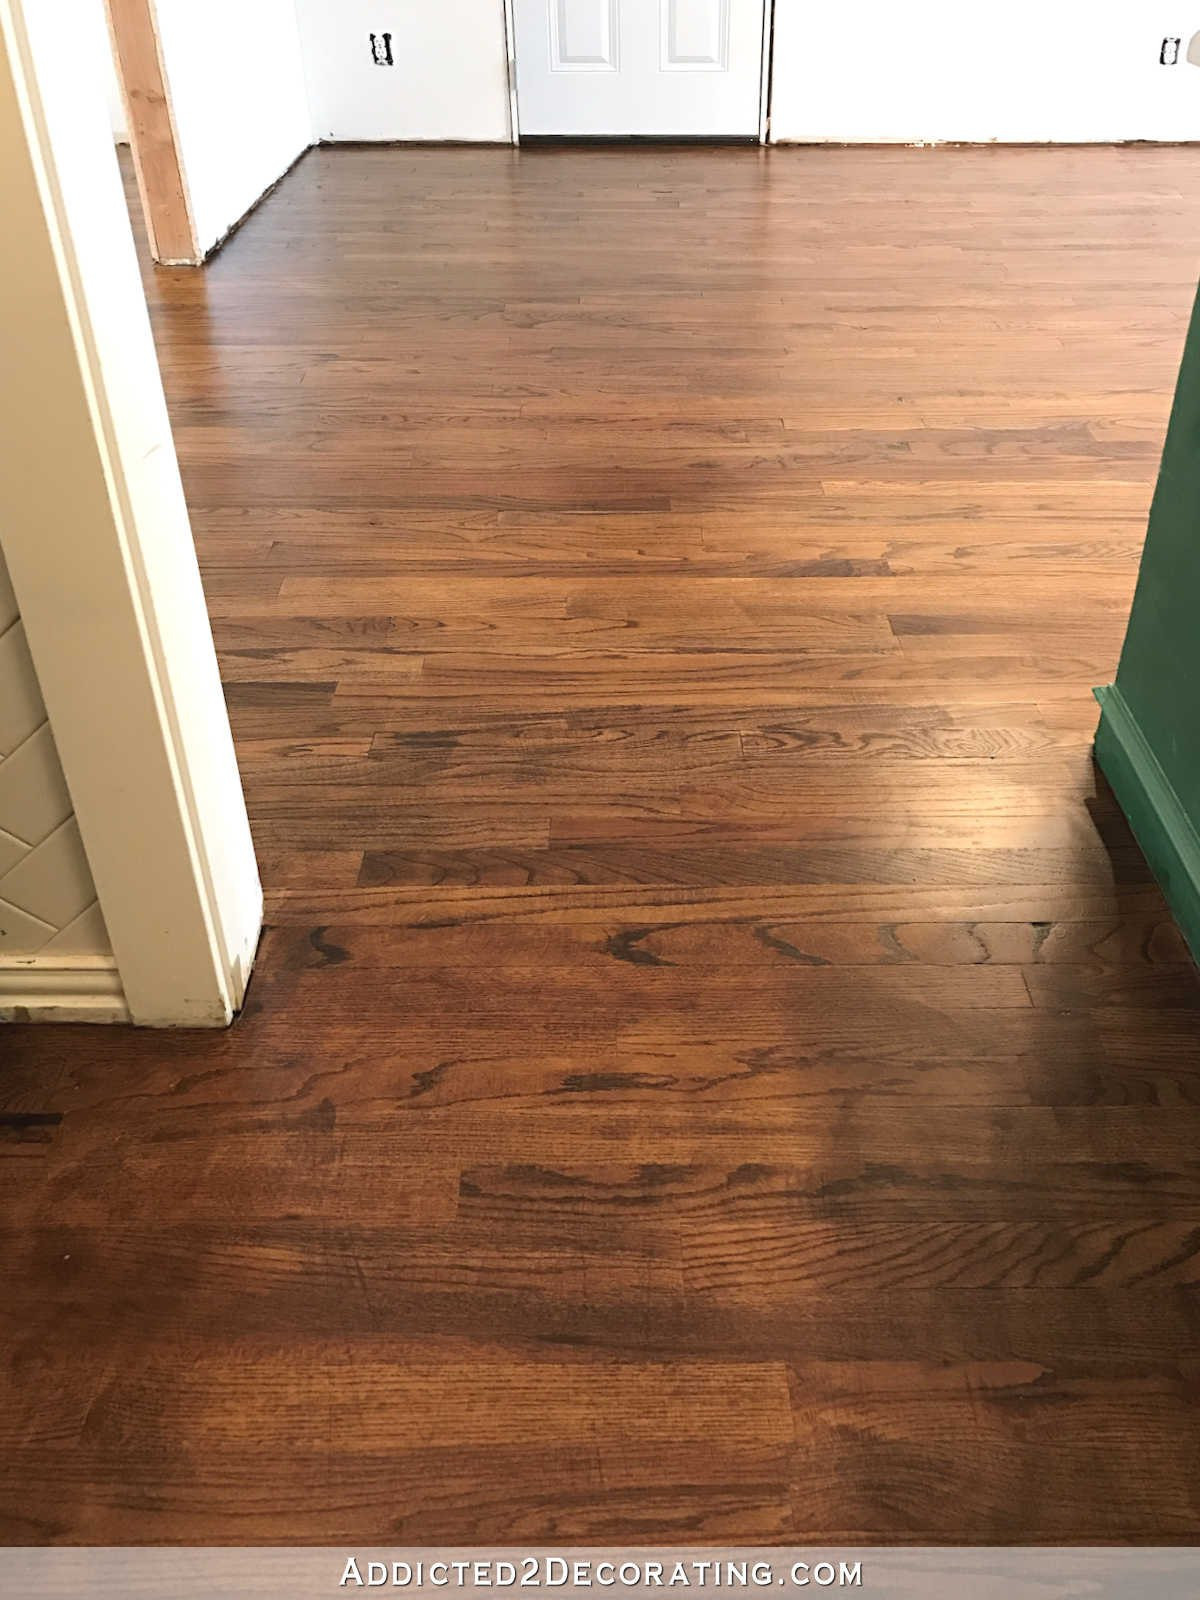 Cost to Refinish Hardwood Floors Calculator Of Cost to Refinish Hardwood Floors Floor Plan Ideas Regarding Cost to Refinish Hardwood Floors How to Clean Pet Stains From Hardwood Floors Podemosleganes